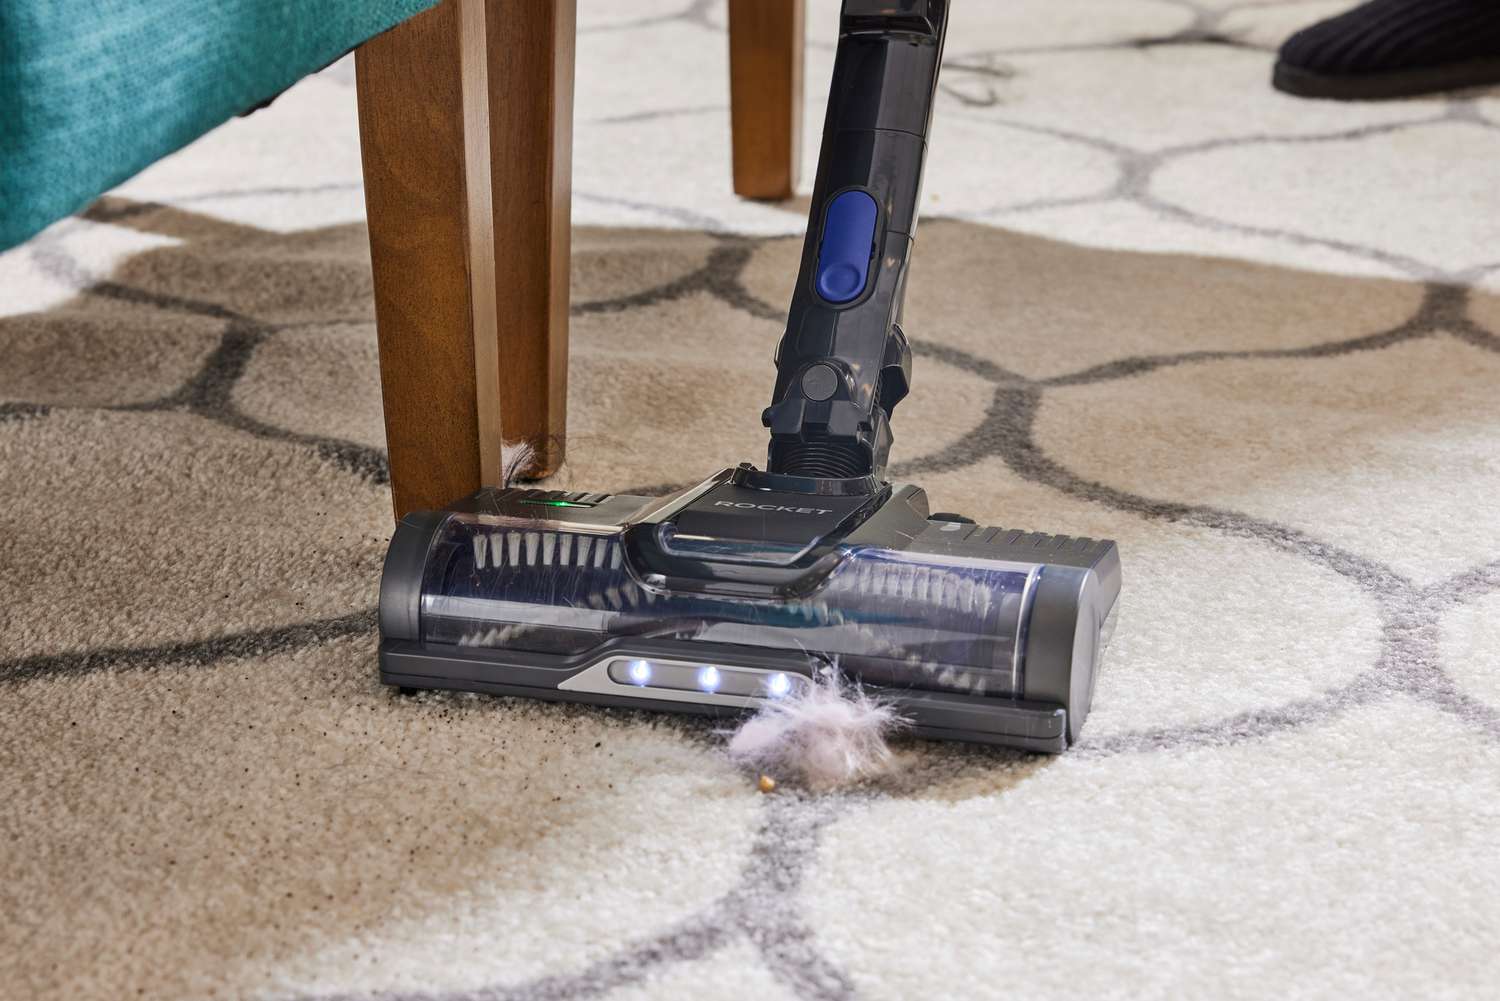 A close-up of his Shark Pet Cordless Stick Vacuum with XL Dust Cup cleaning a rug